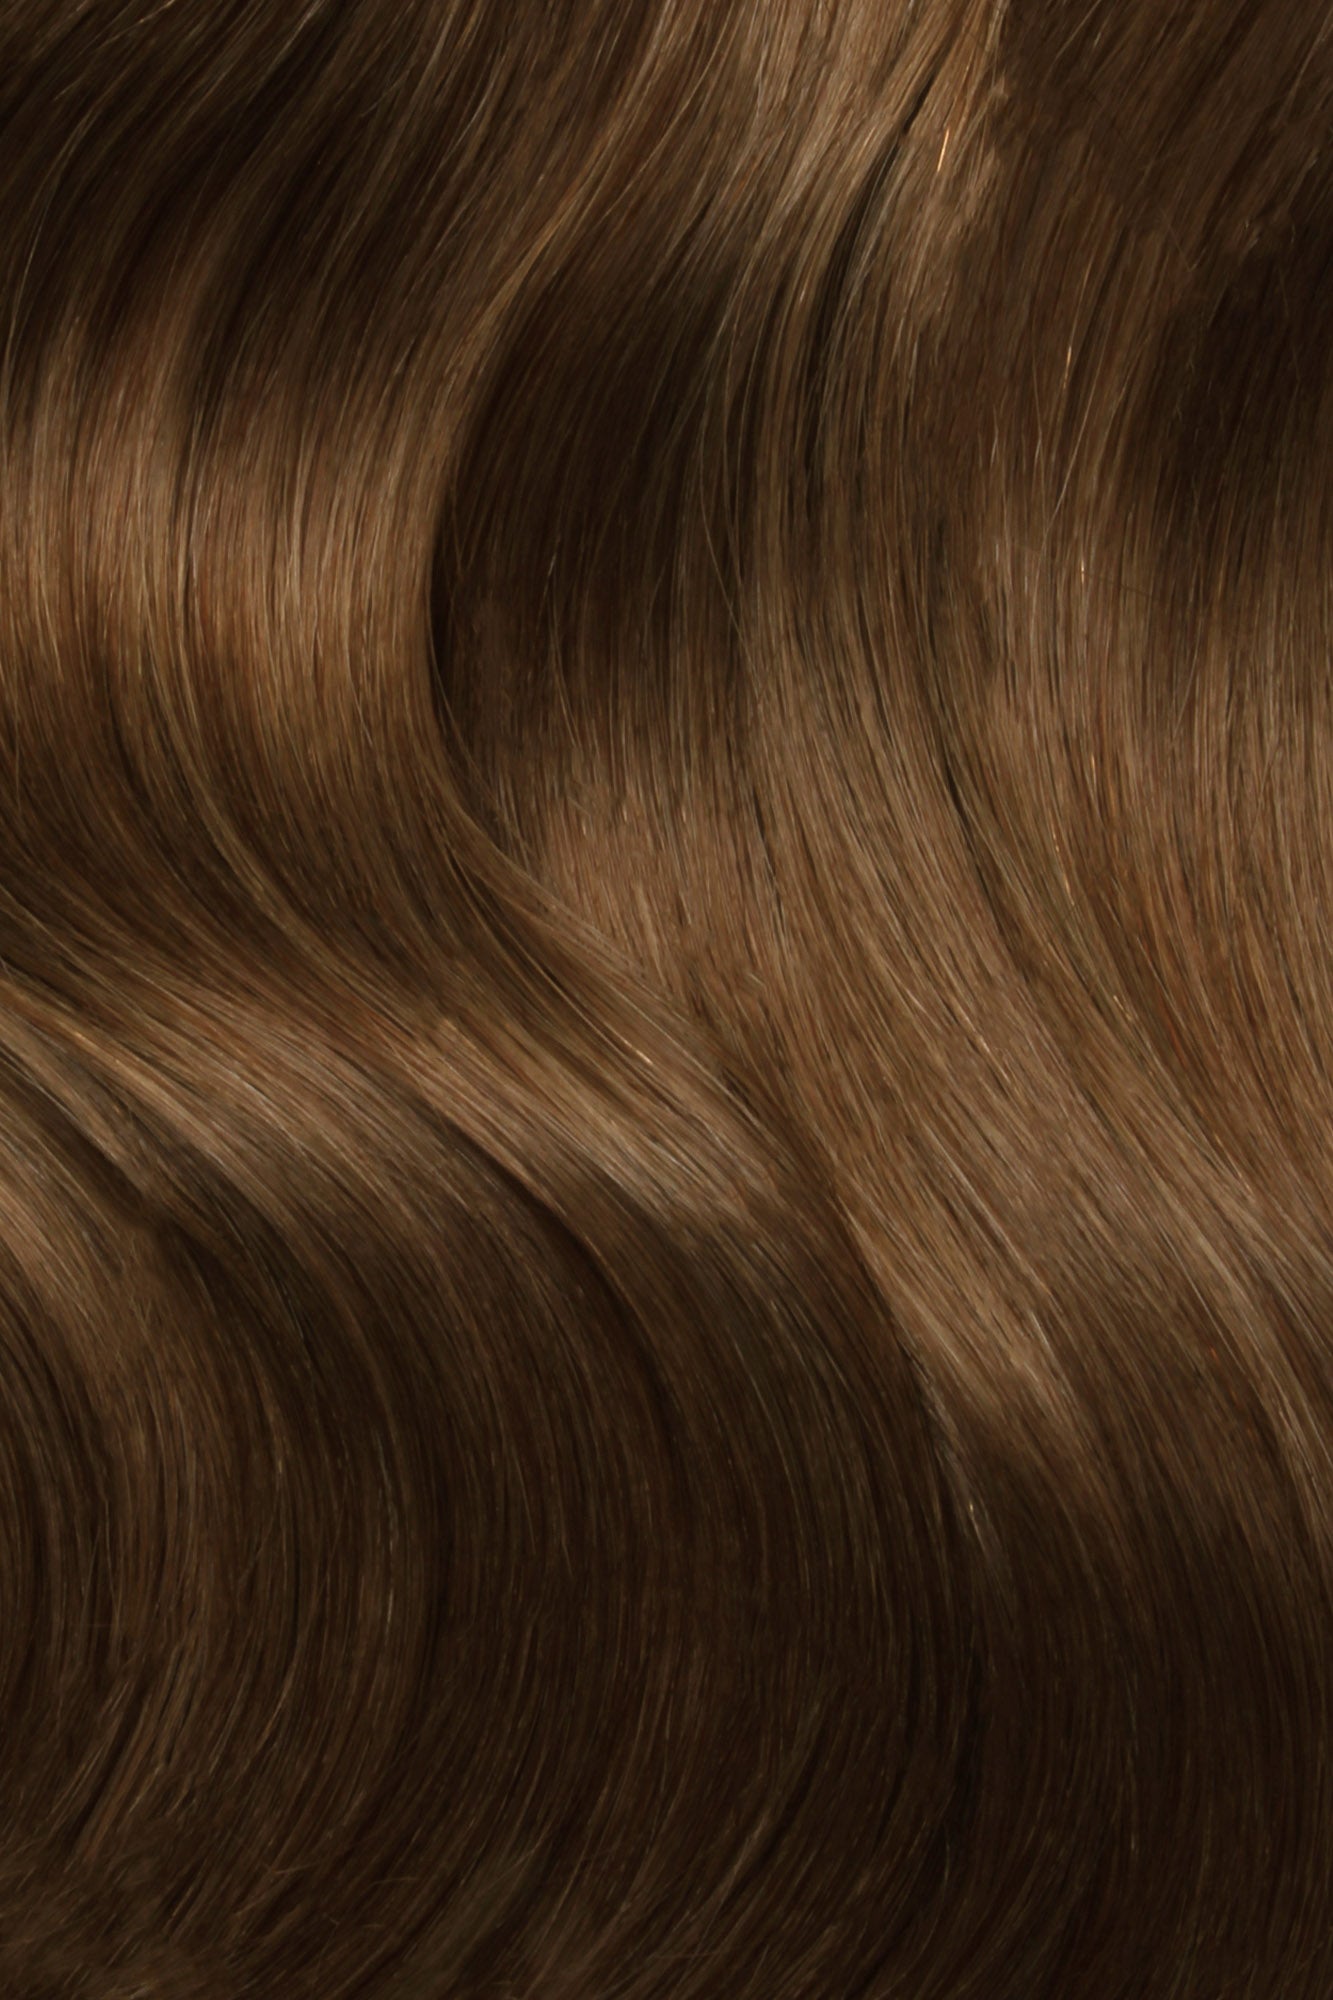 Nano Bonds 22 Inches - SWAY Hair Extensions Chestnut-Brown-4 Ultra-fine, invisible bonds for a flawless, natural look. 100% Remy Human hair, lightweight and versatile. Reusable and perfect for individual or salon use.